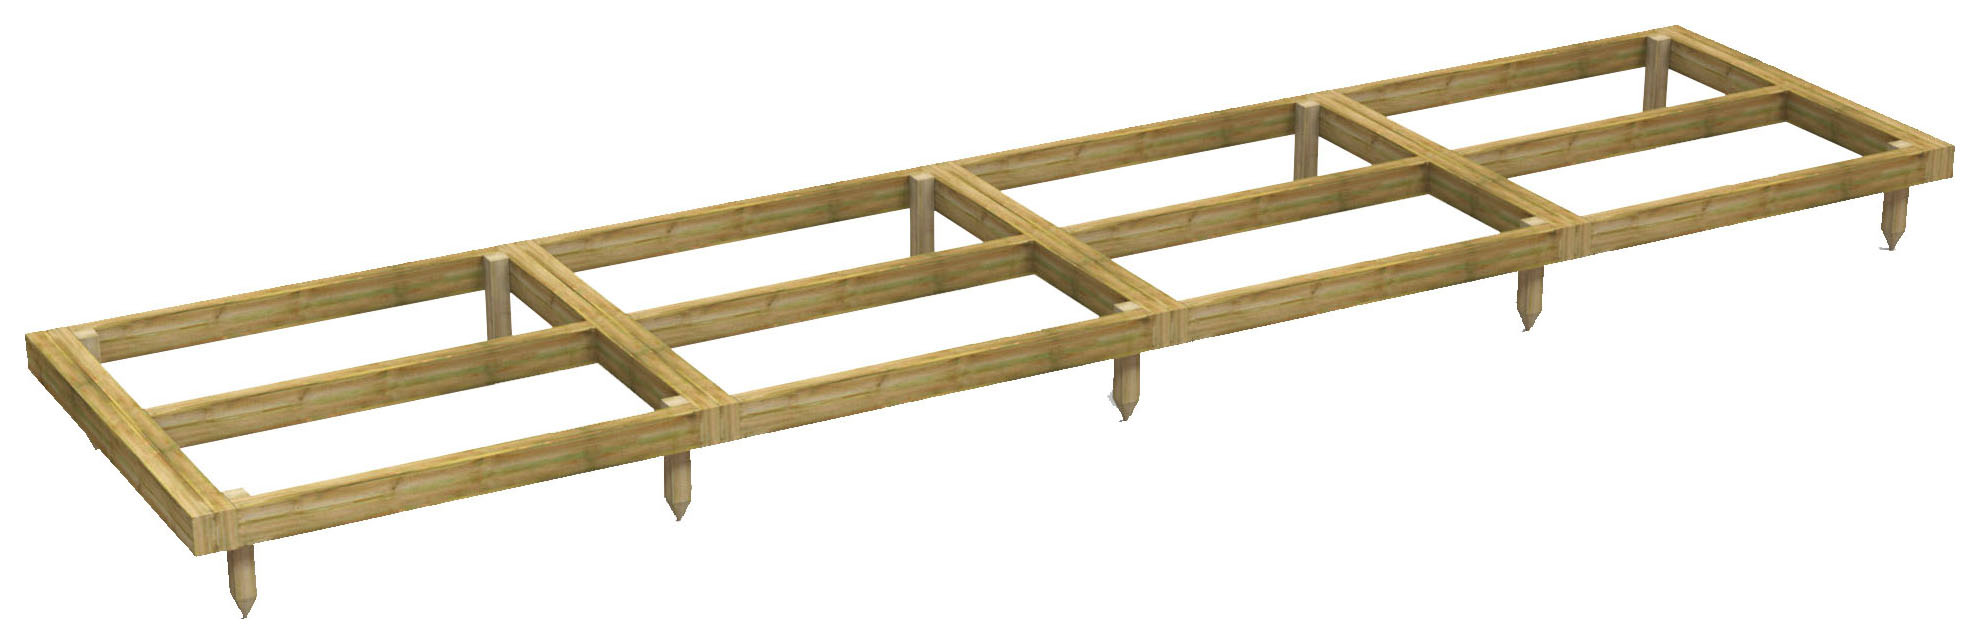 Power Sheds Pressure Treated Garden Building Base Kit - 16 x 4ft